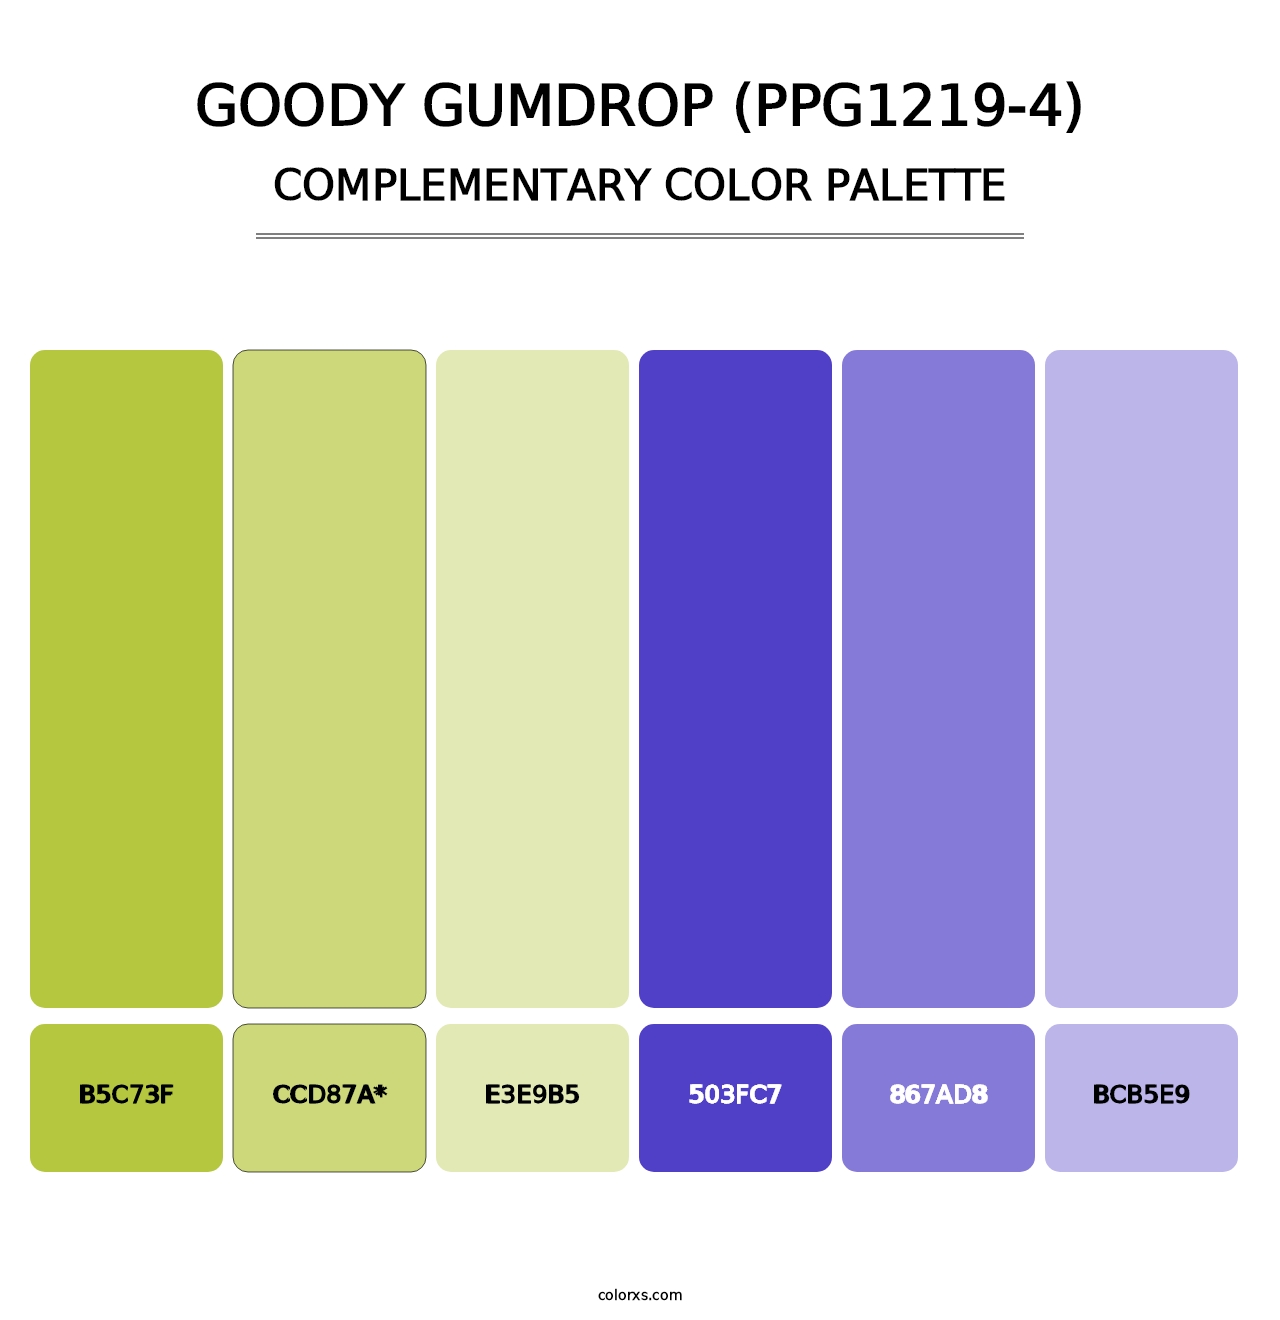 Goody Gumdrop (PPG1219-4) - Complementary Color Palette